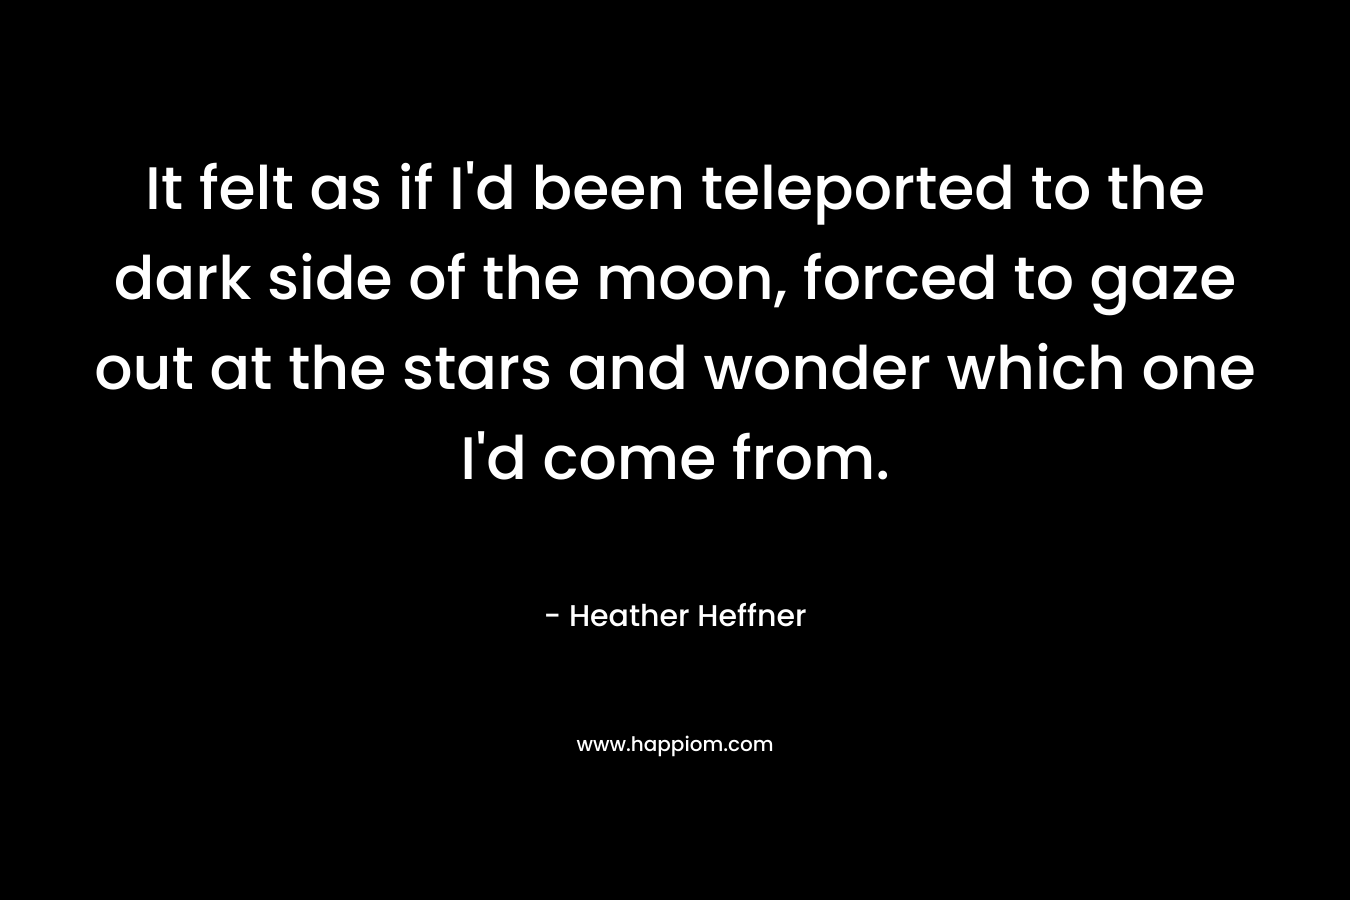 It felt as if I’d been teleported to the dark side of the moon, forced to gaze out at the stars and wonder which one I’d come from. – Heather Heffner